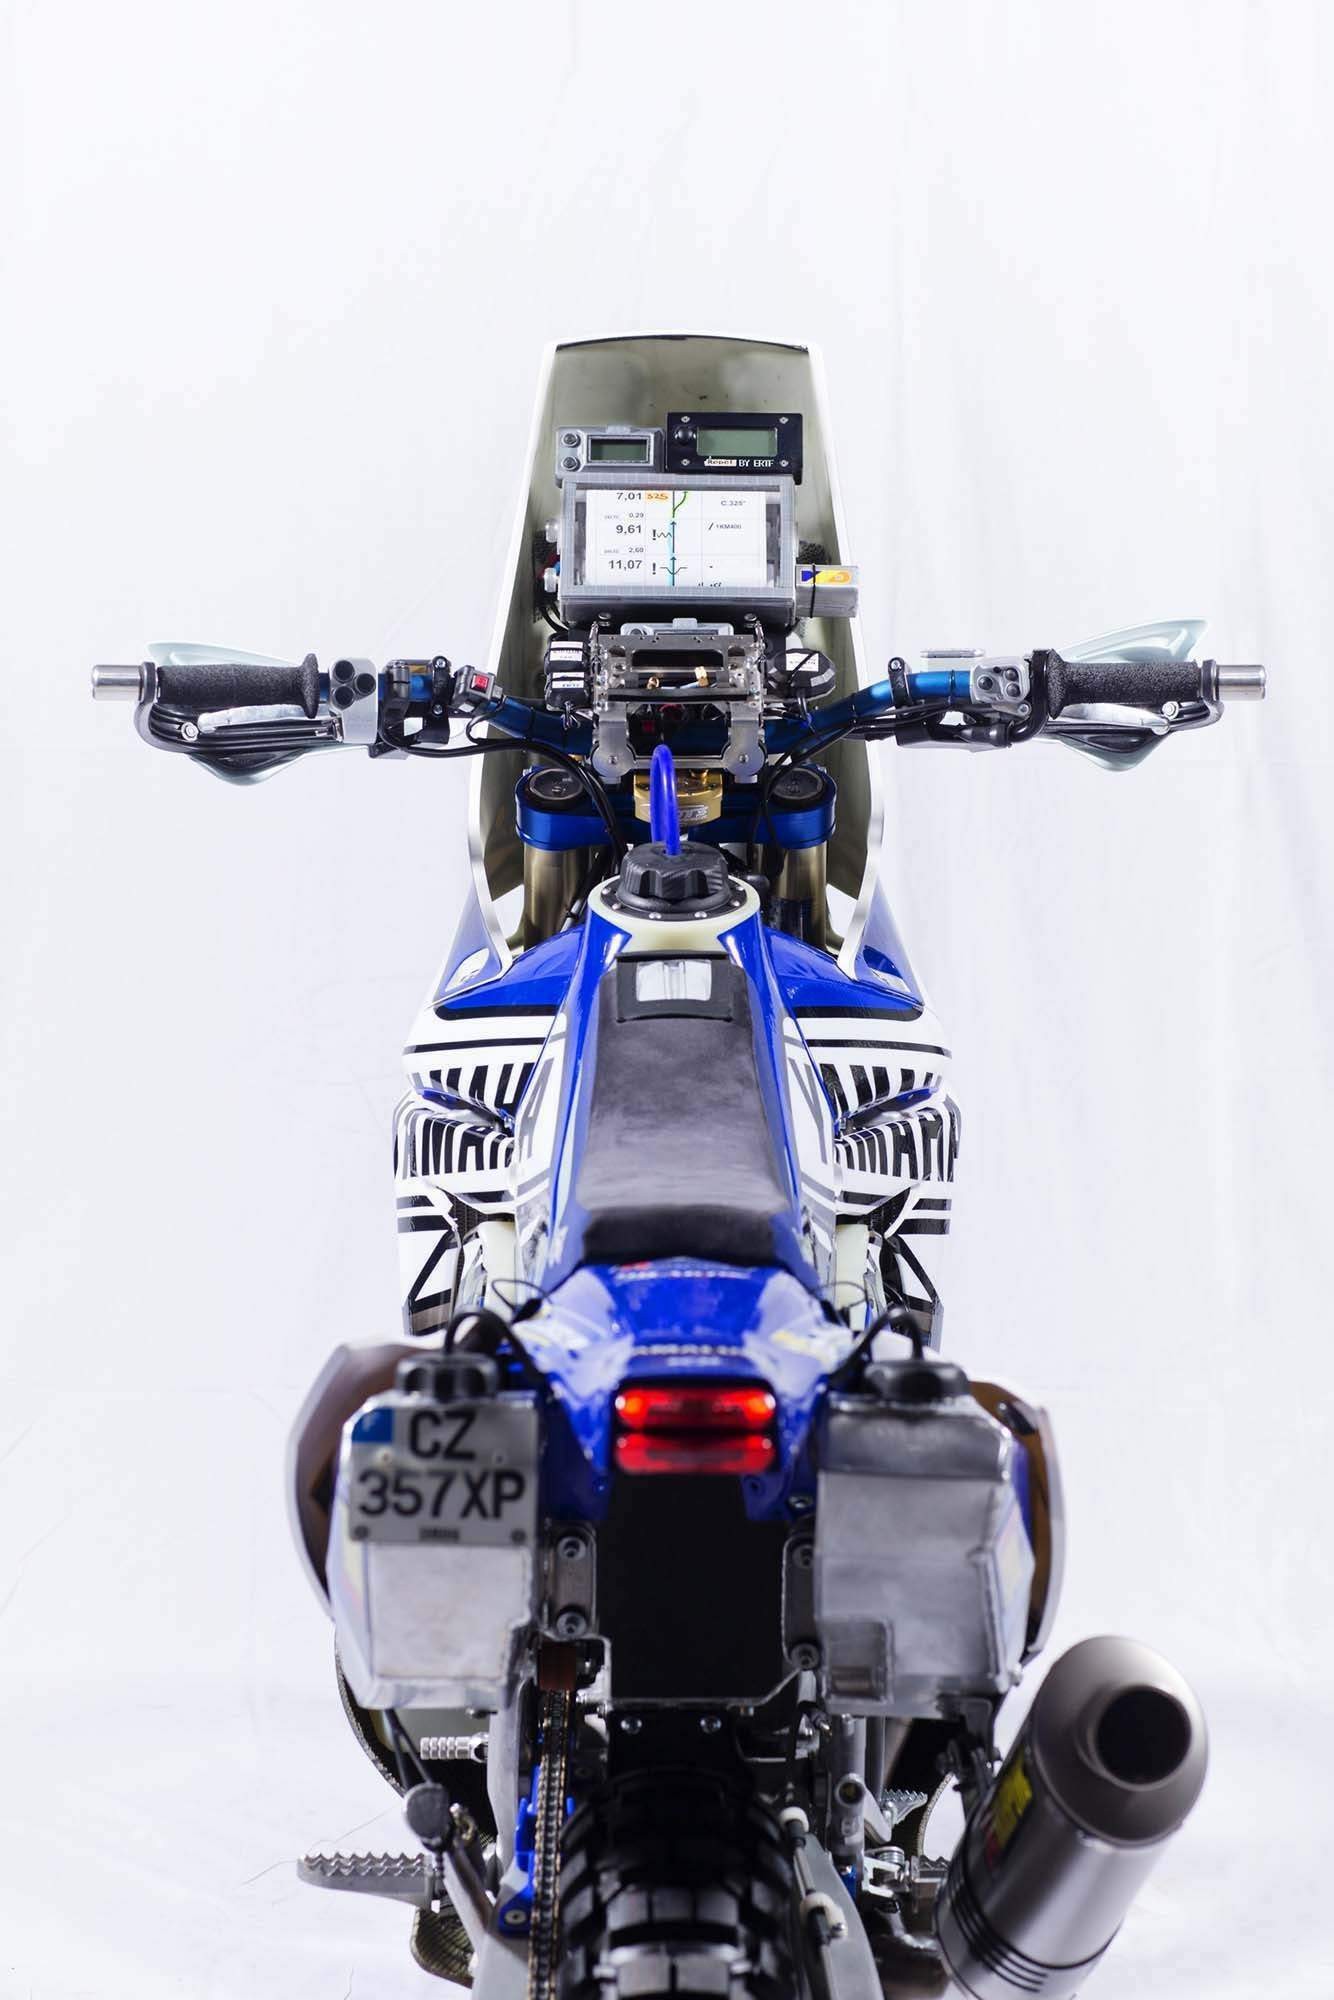 Yamaha YZ 450F Rally For Sale Specifications, Price and Images